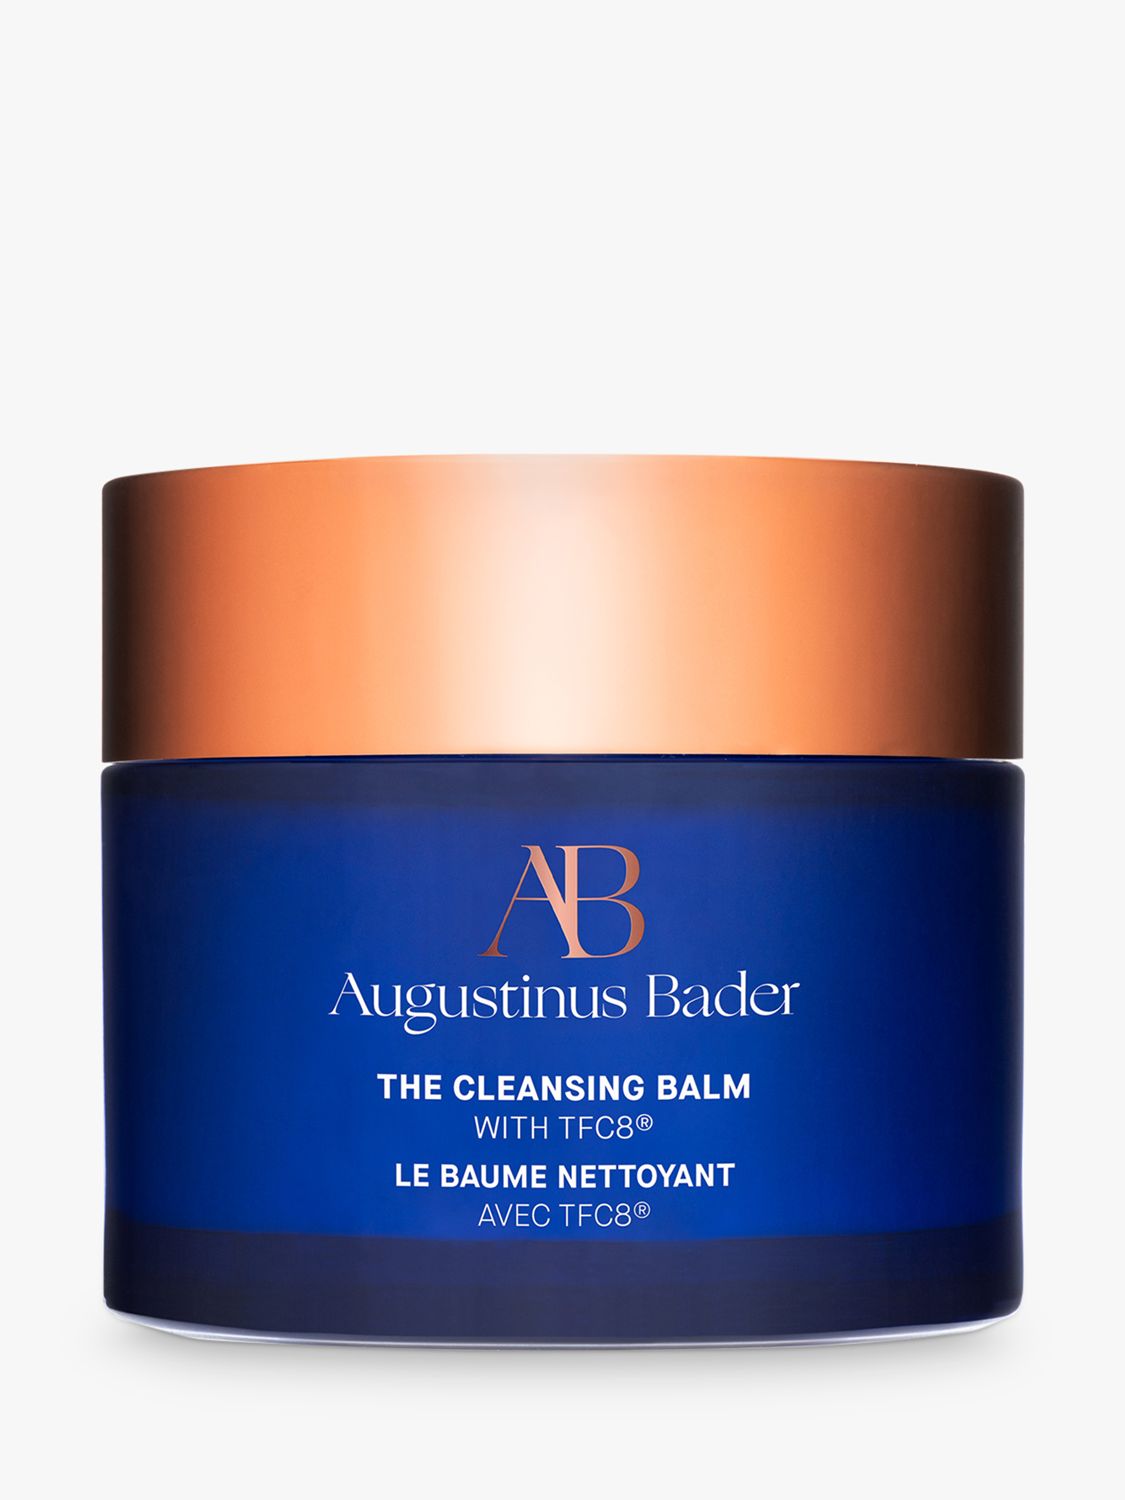 Augustinus Bader The Cleansing Balm, 90g